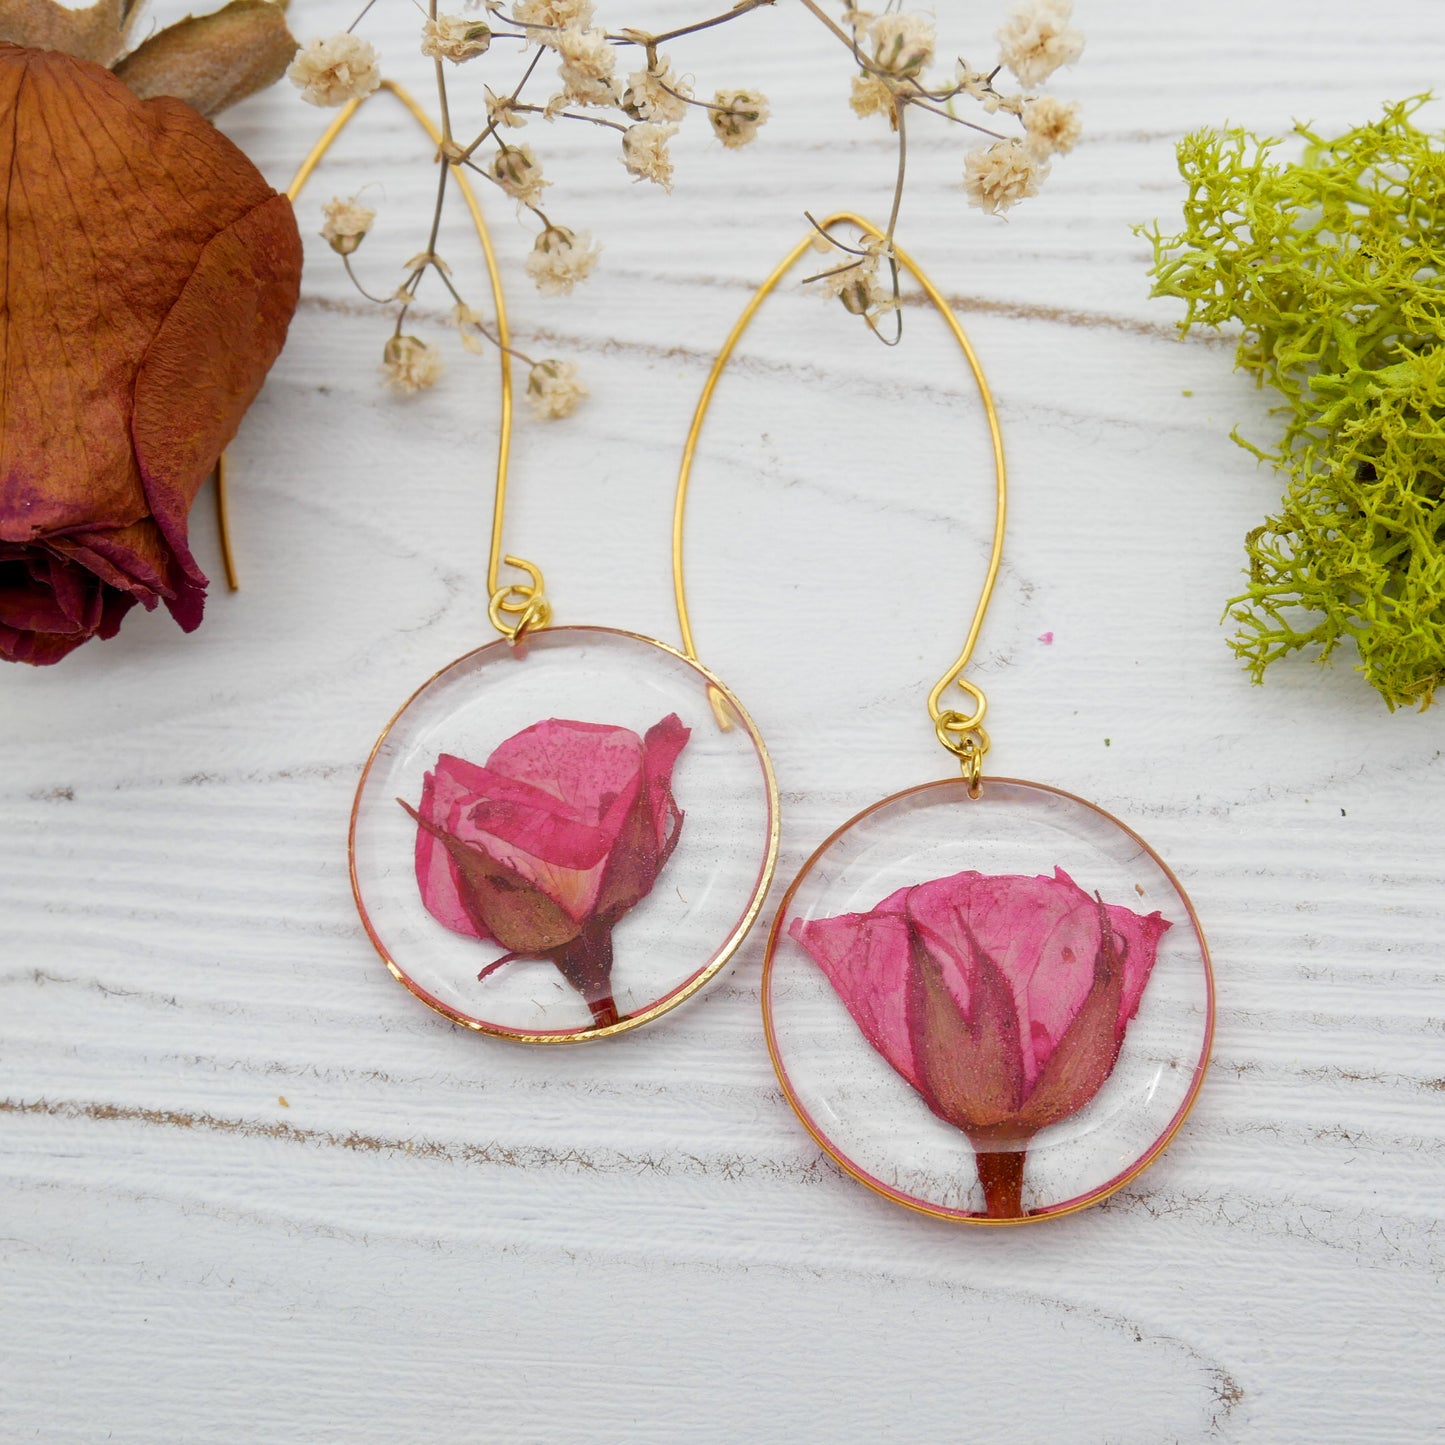 Large Rose Statement Earrings